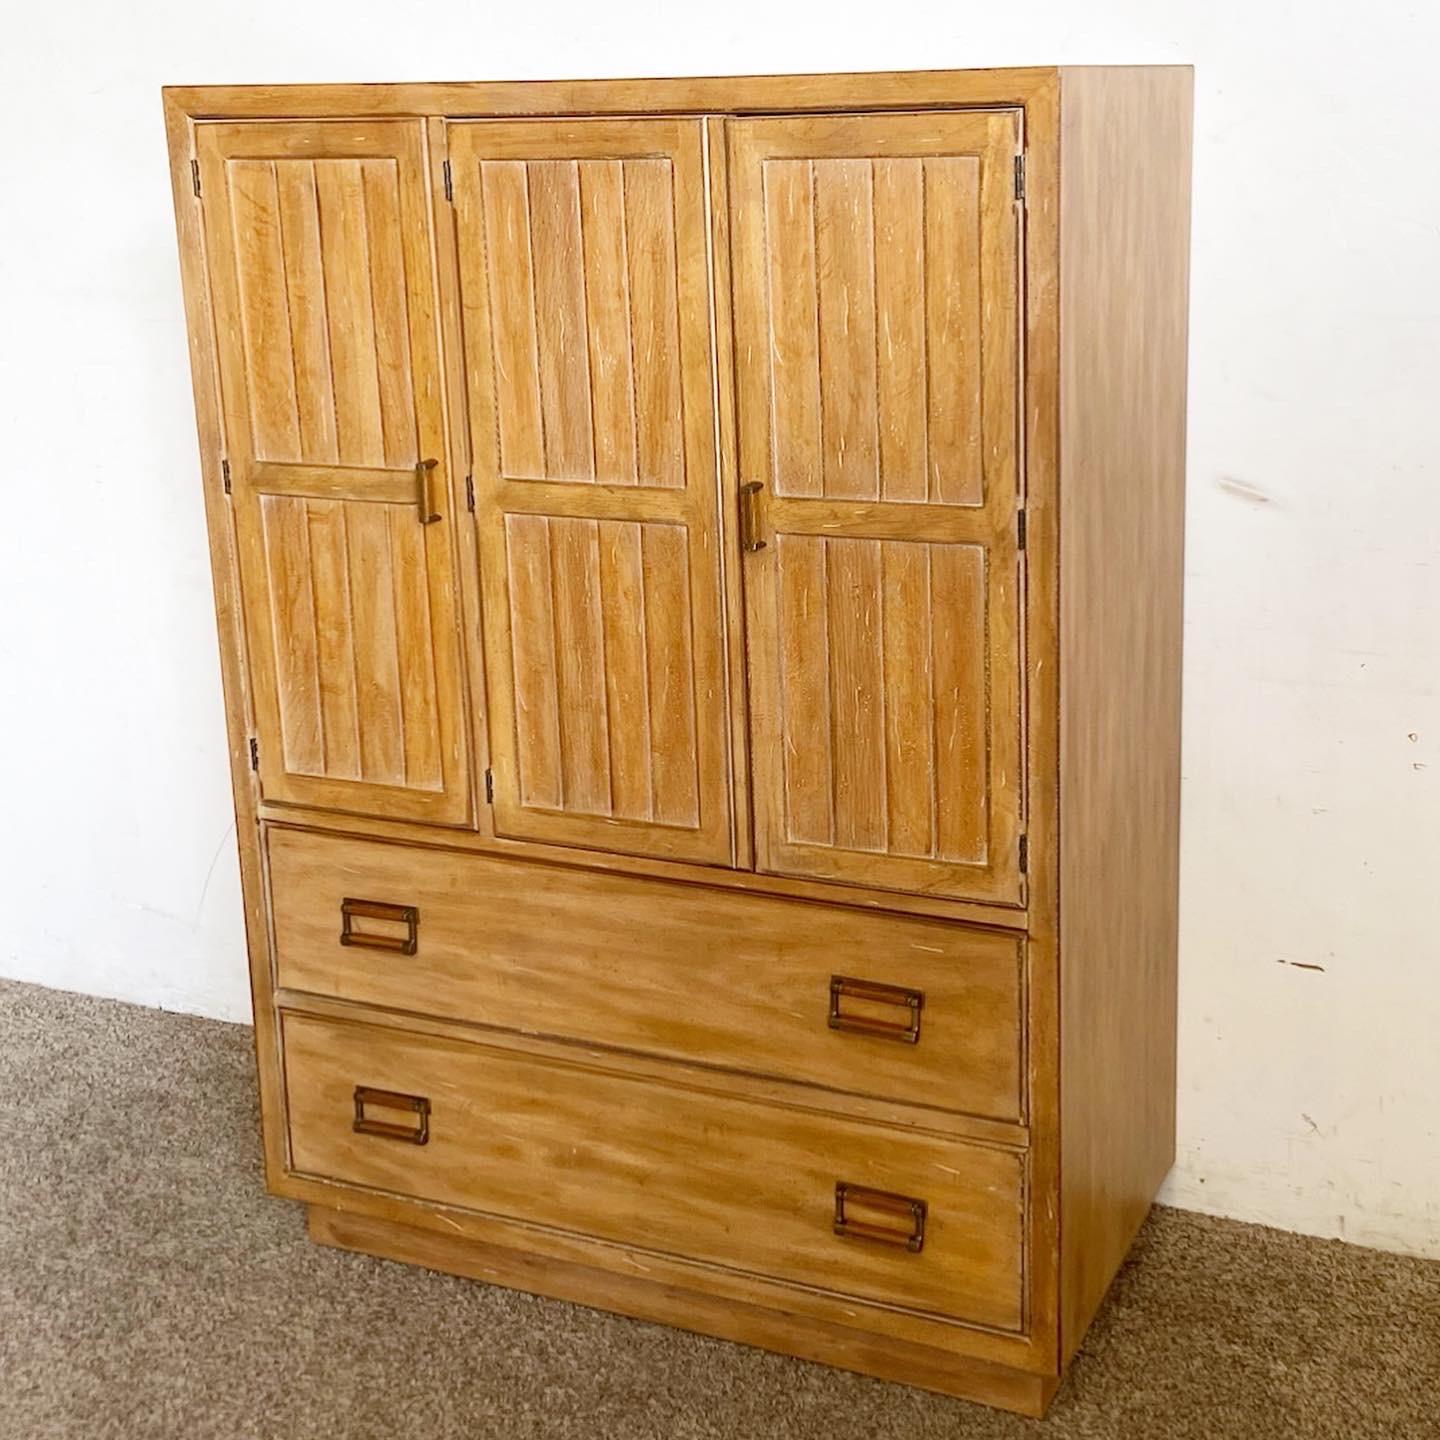 Elevate your space with the Mid-Century Drexel Highboy Armoire. Crafted by Drexel, this timeless piece offers ample storage with a blend of drawers and shelving, embodying both elegance and functionality.
Minor wear around the edges as seen in the